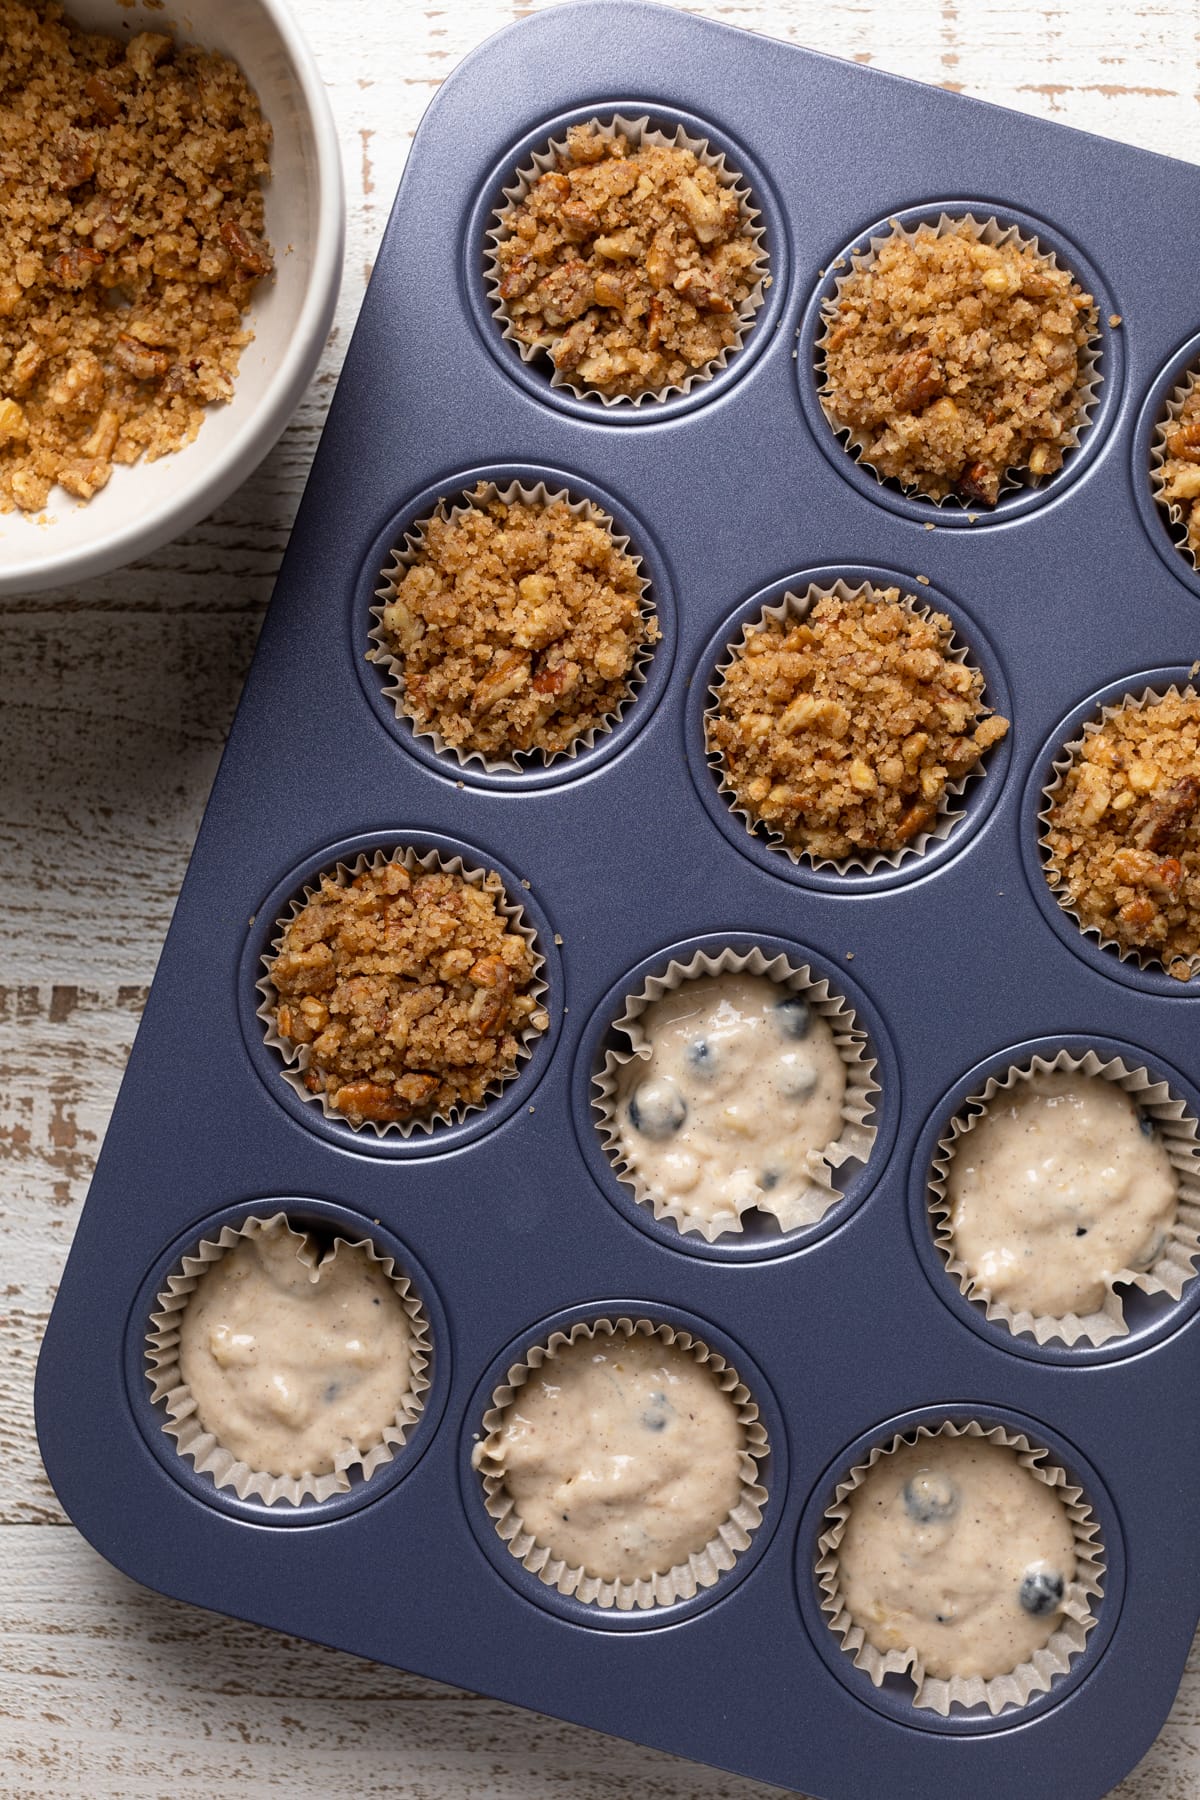 Vegan Banana Blueberry Pecan Crumble Muffin batter in a muffin pan, some of which have been topped with crumble